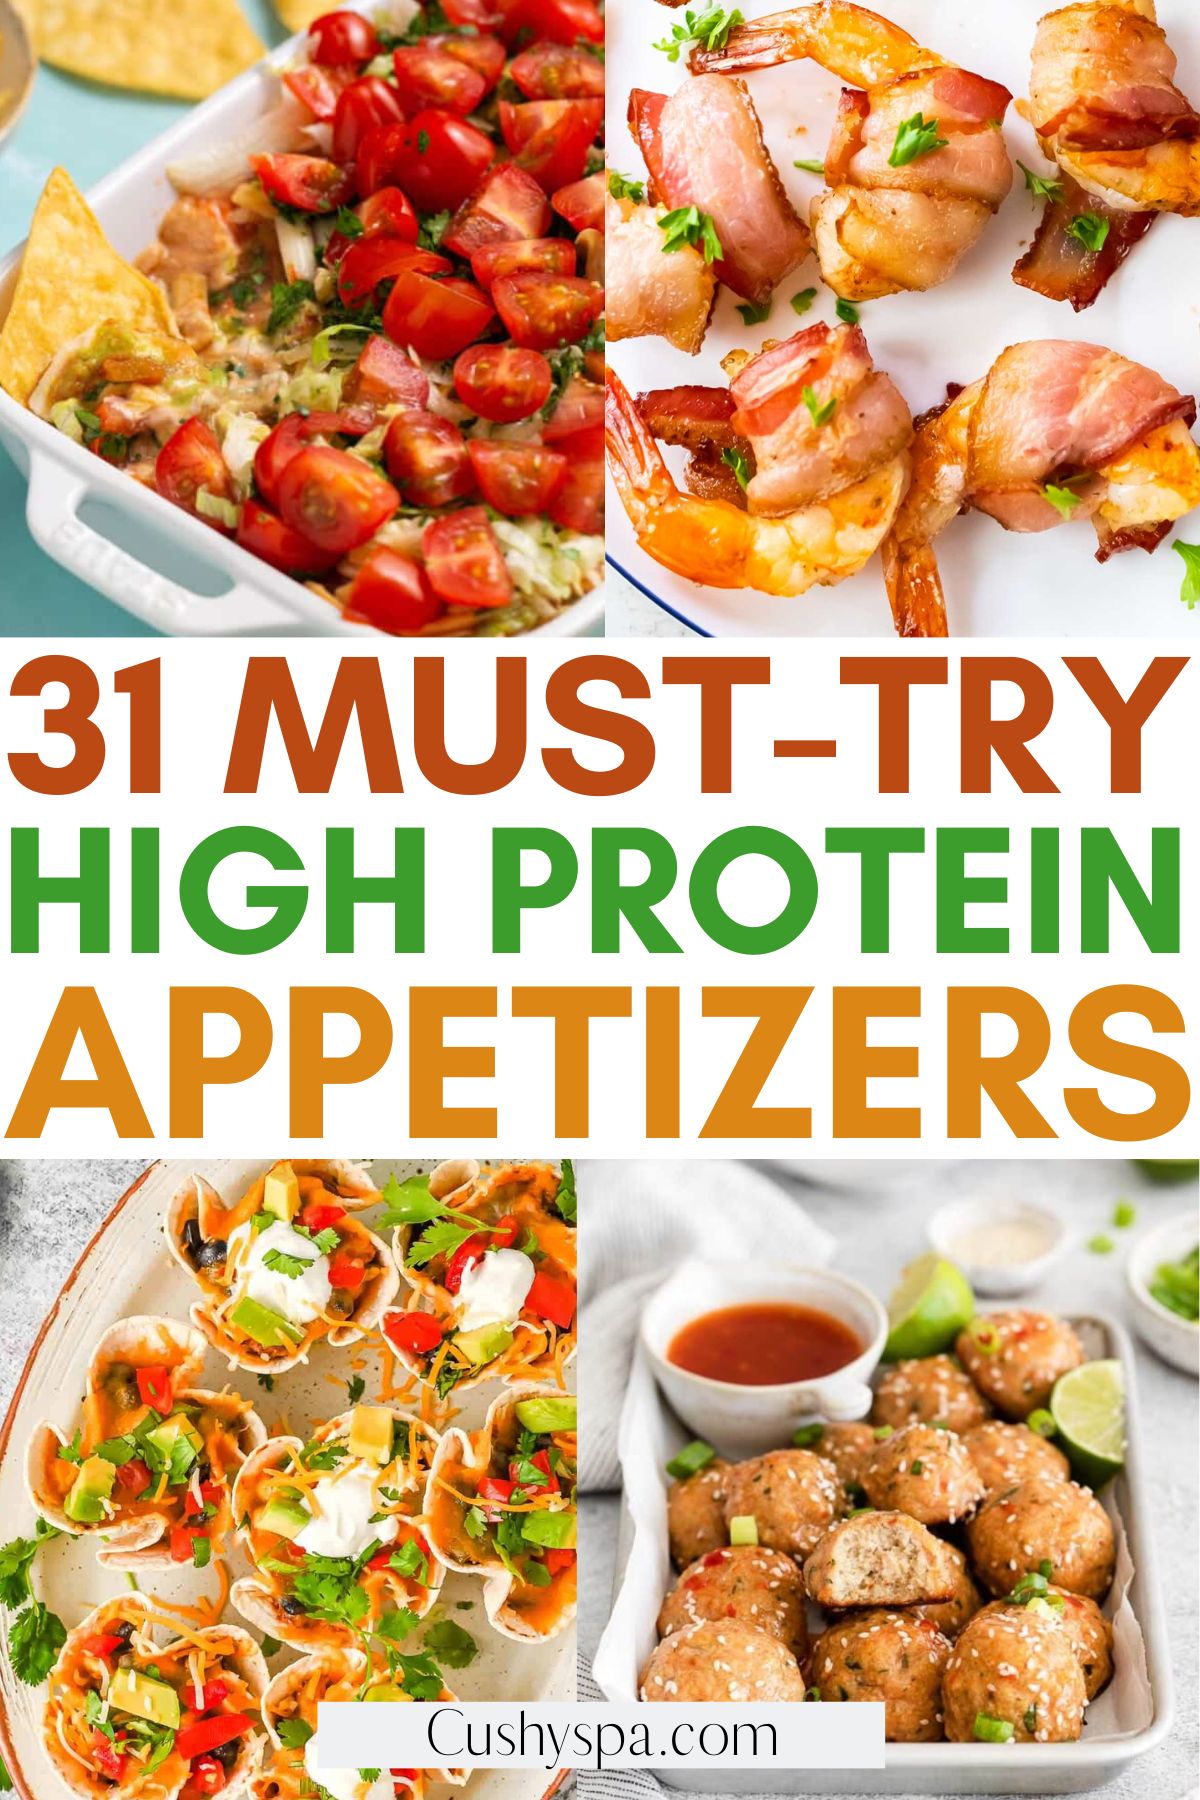 High Protein Appetizers